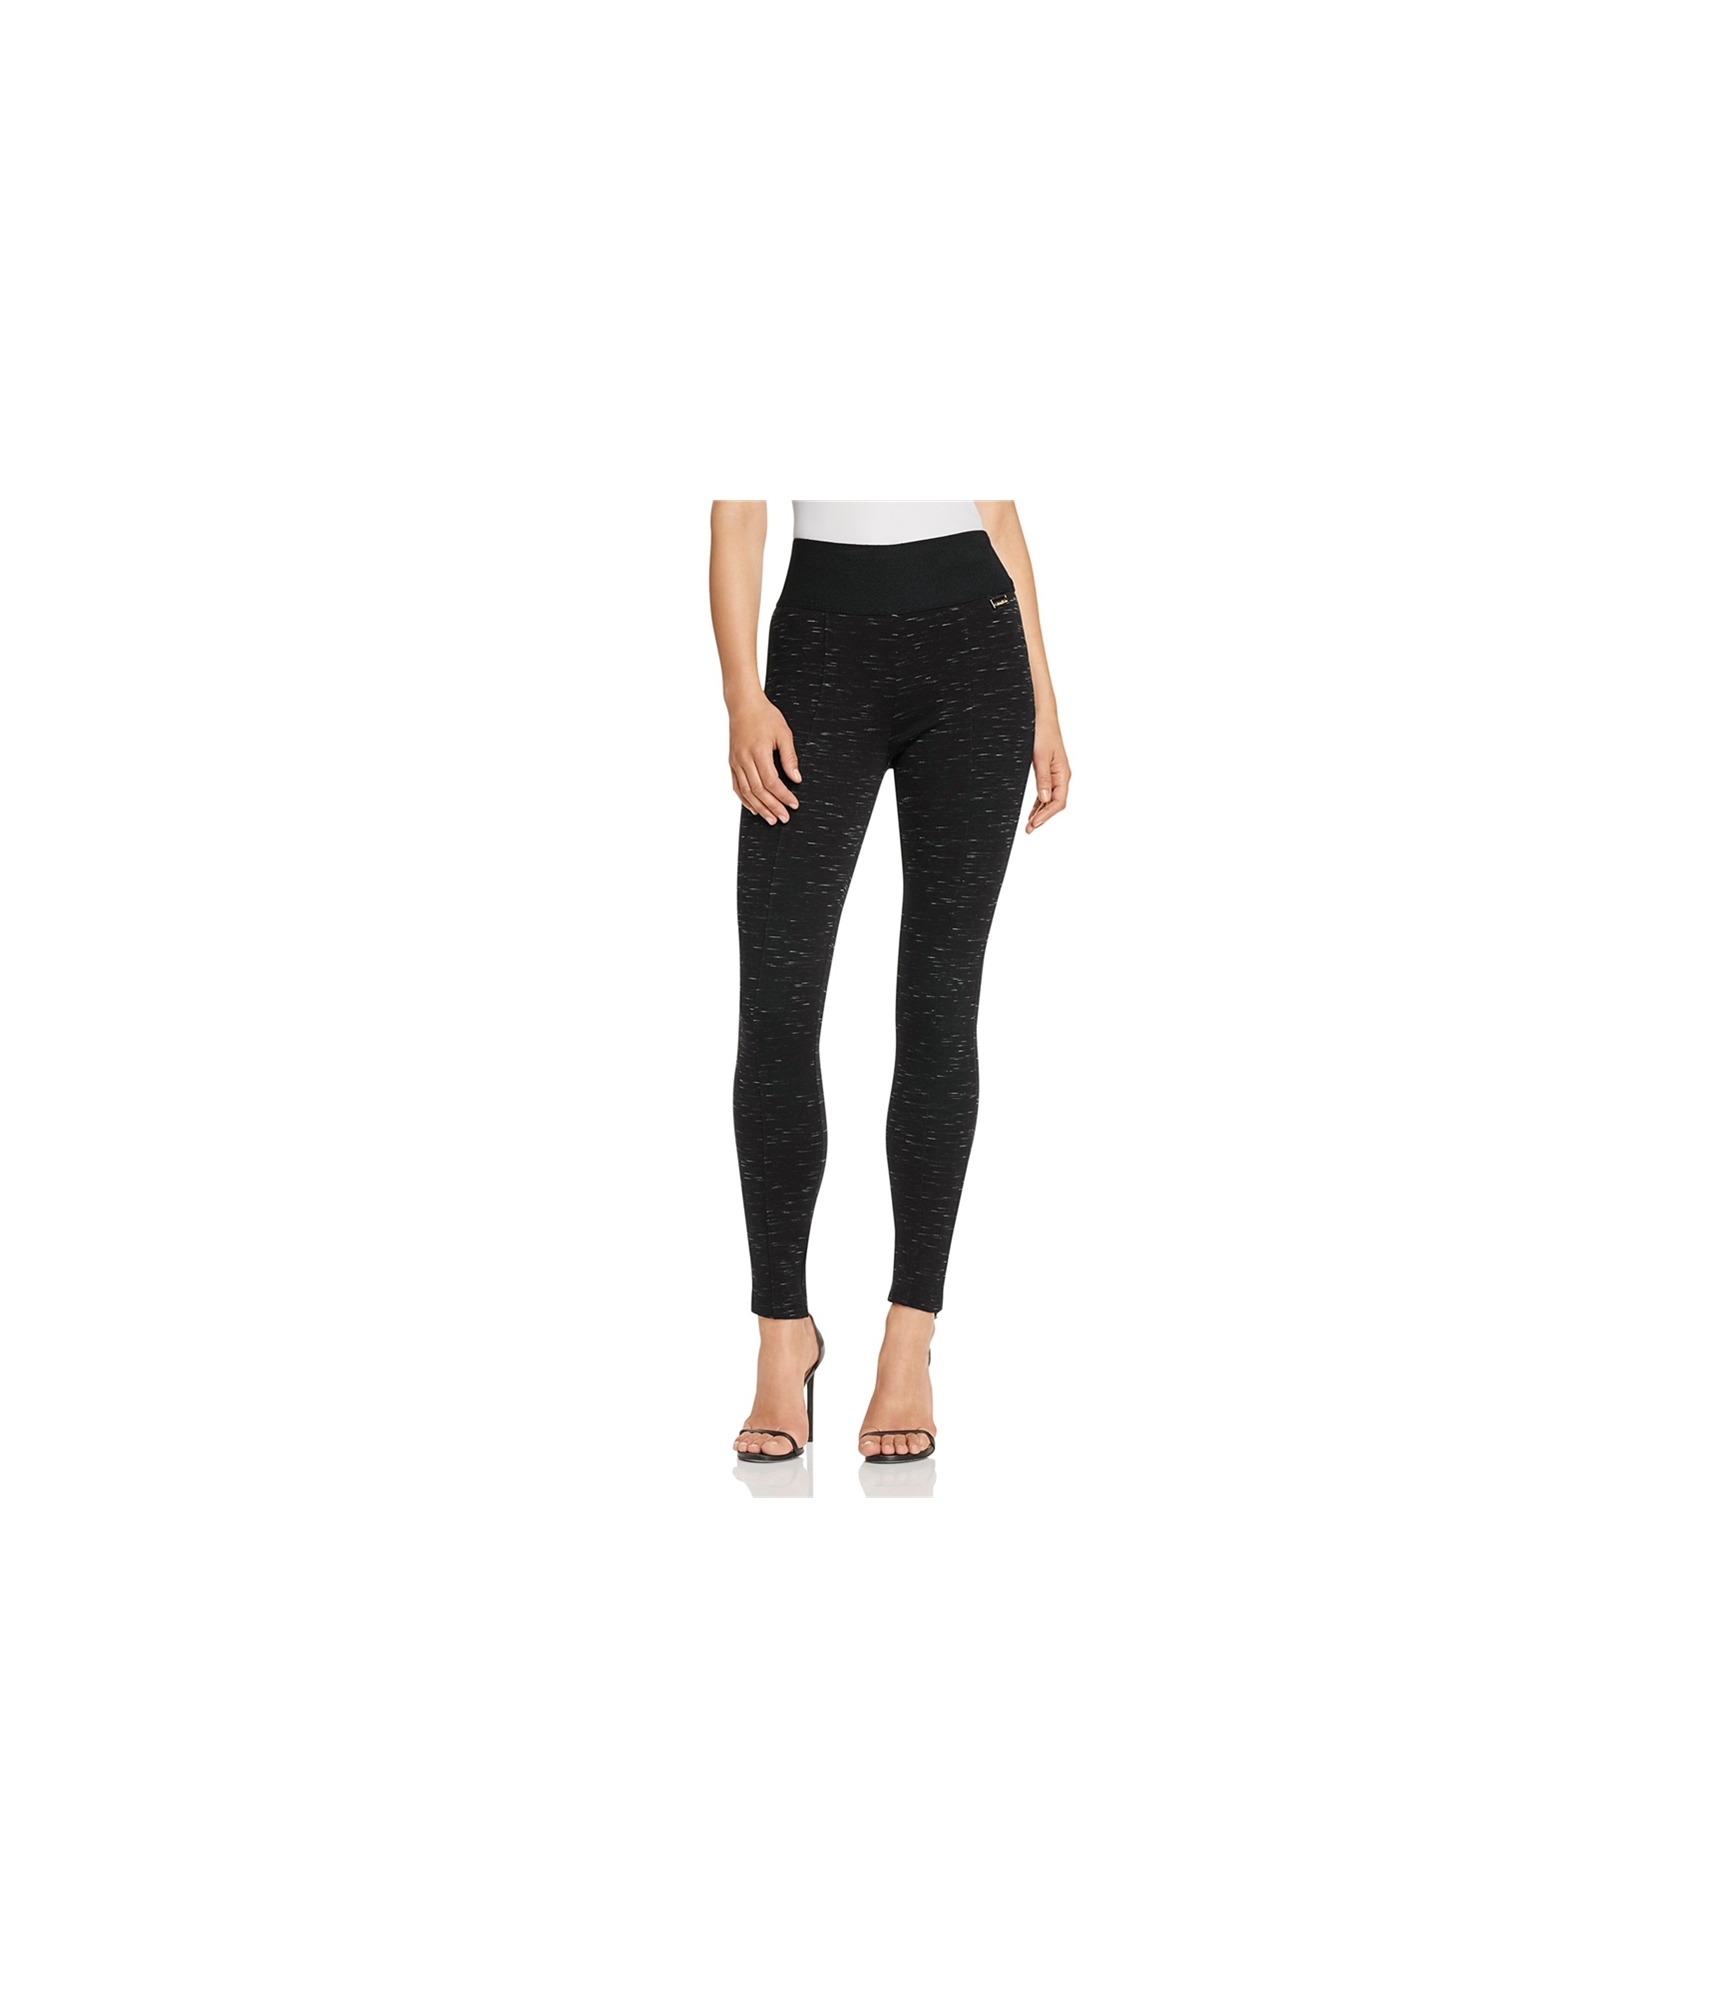 Buy a Womens Calvin Klein Space-Dyed Casual Leggings Online 